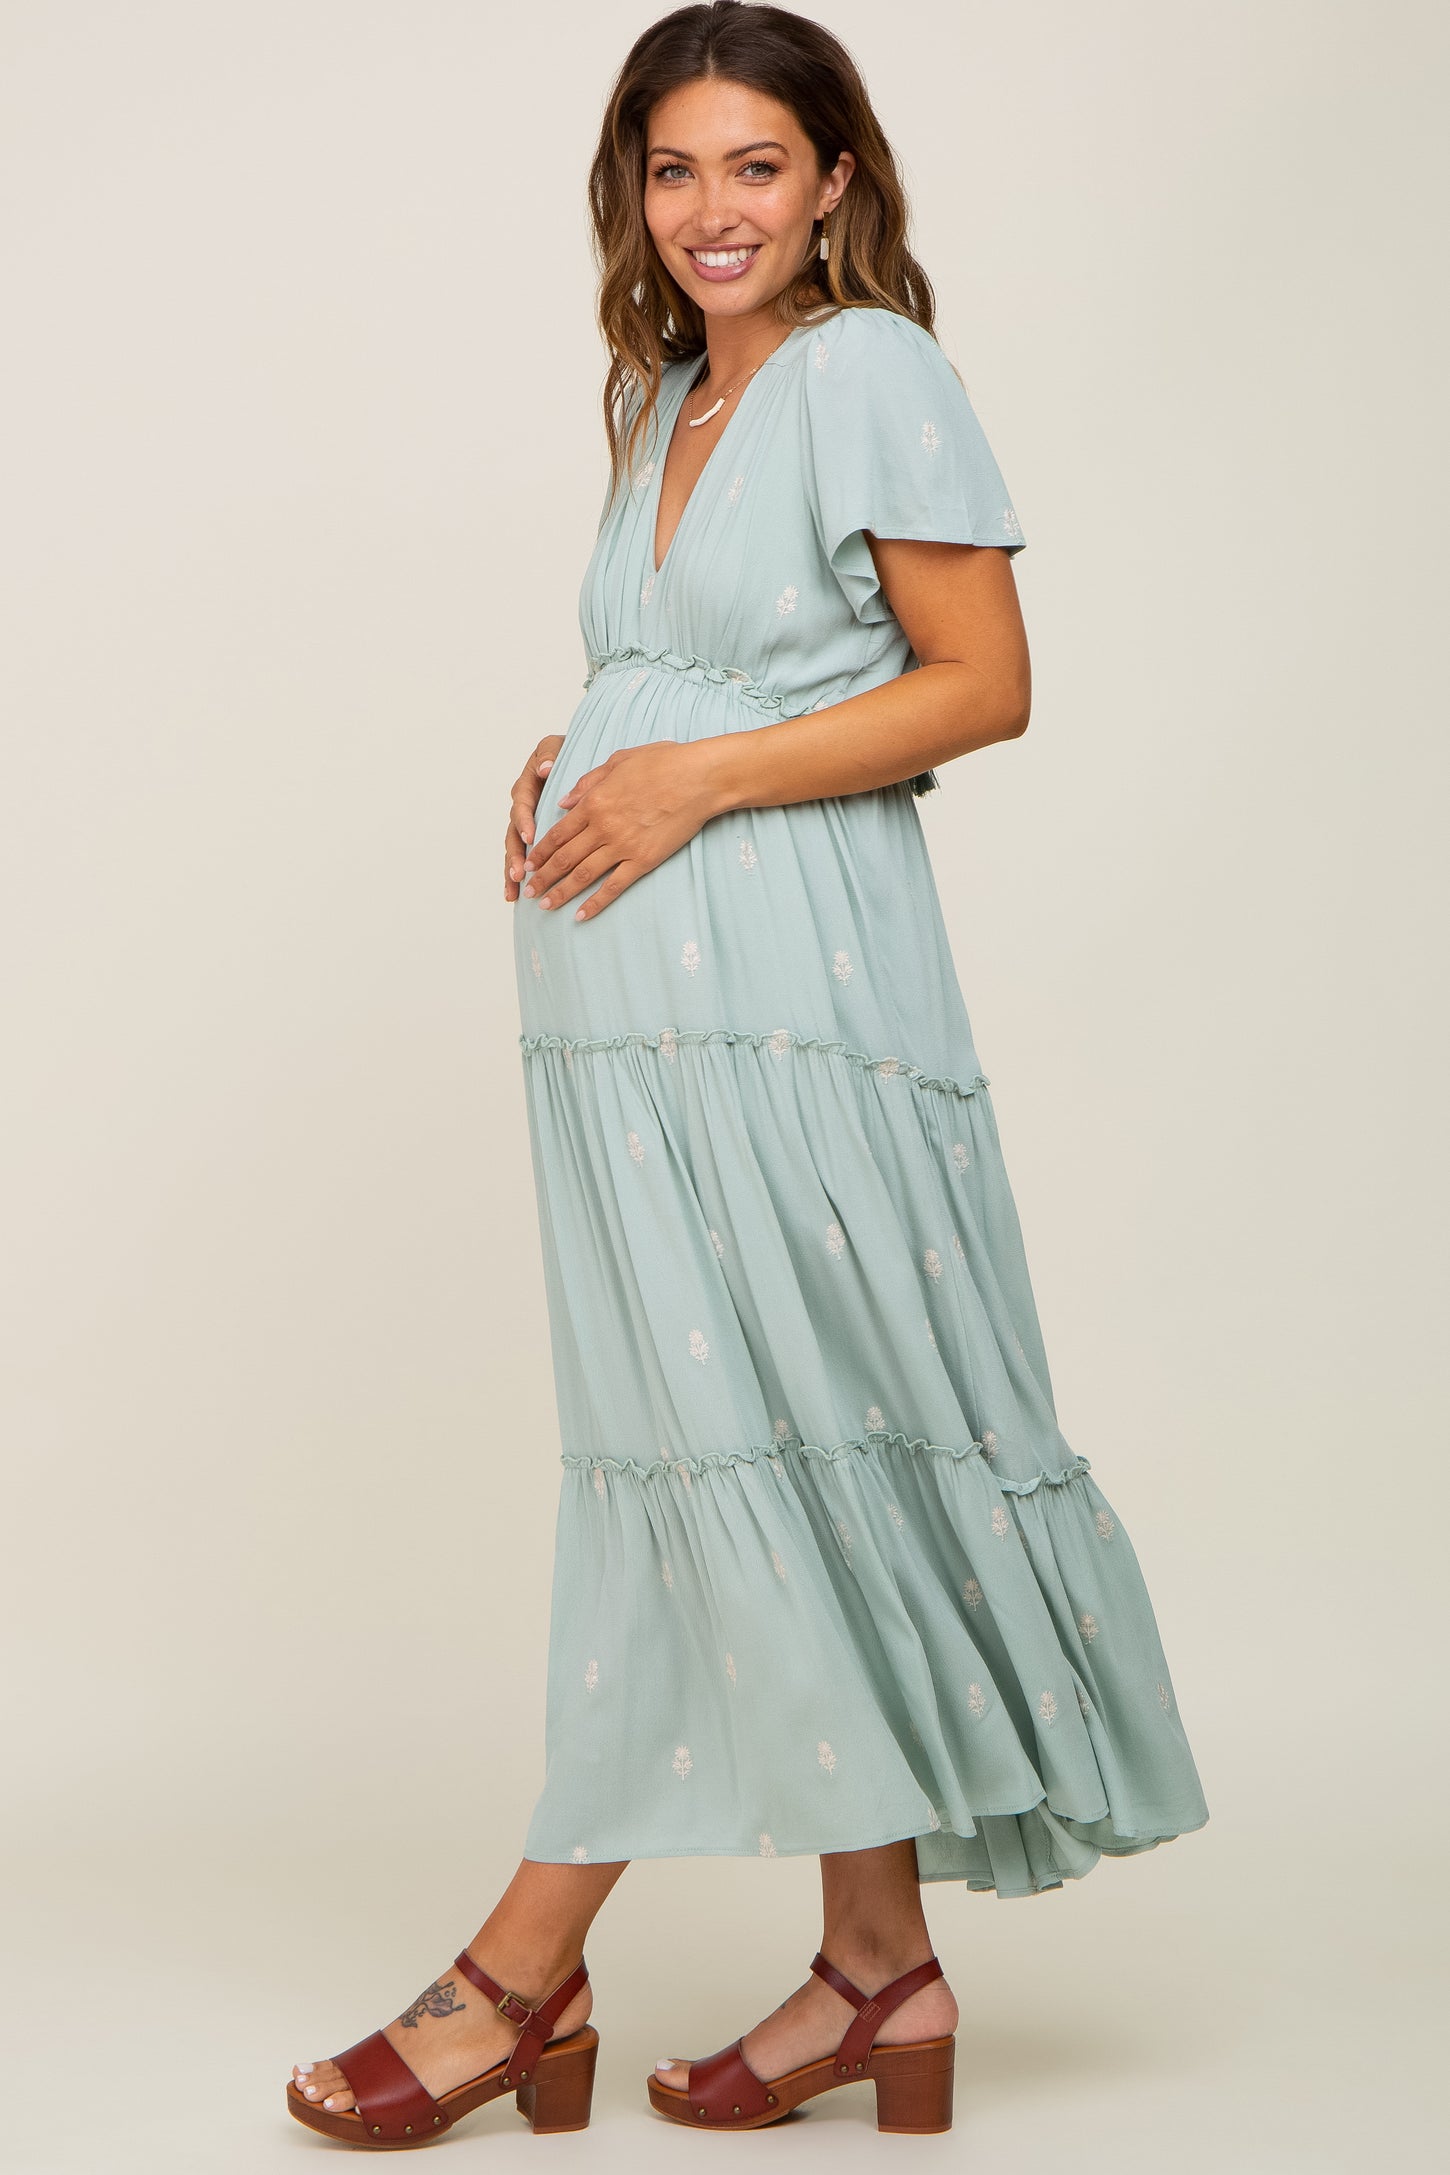 Mint Green Floral Embroidered Tiered Maternity Maxi Dress